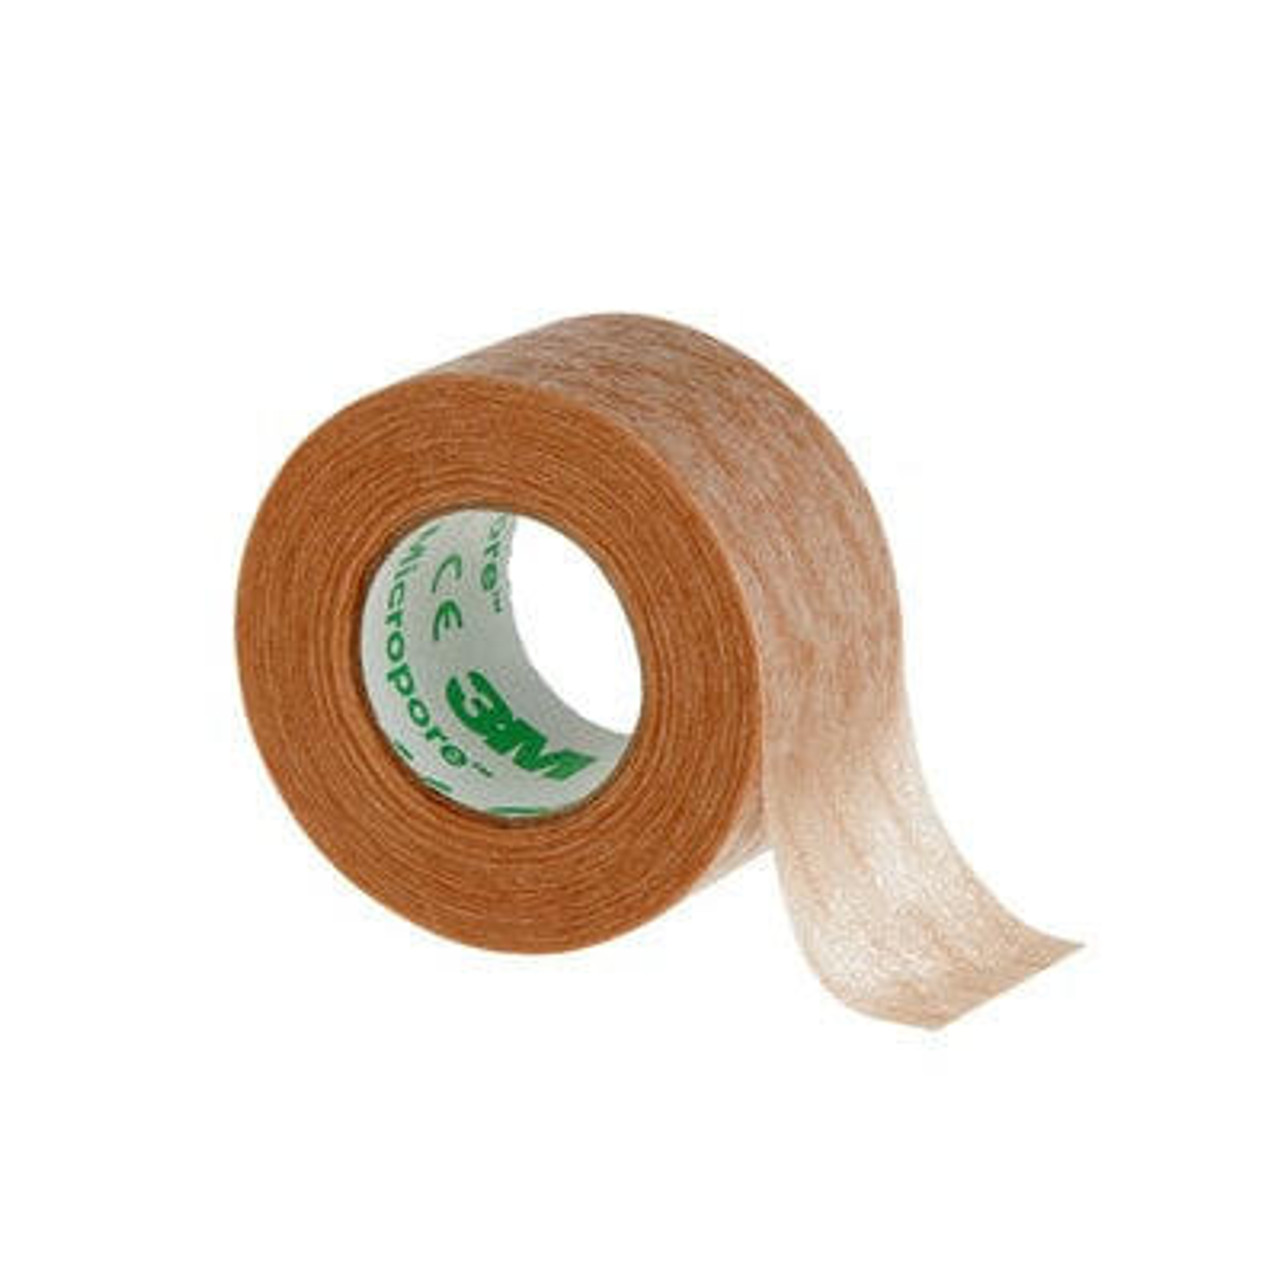 FDR-1533-1 3M Micropore Surgical Tape Tan Coloured 2.5cmx9.14m Box of 12 rolls   